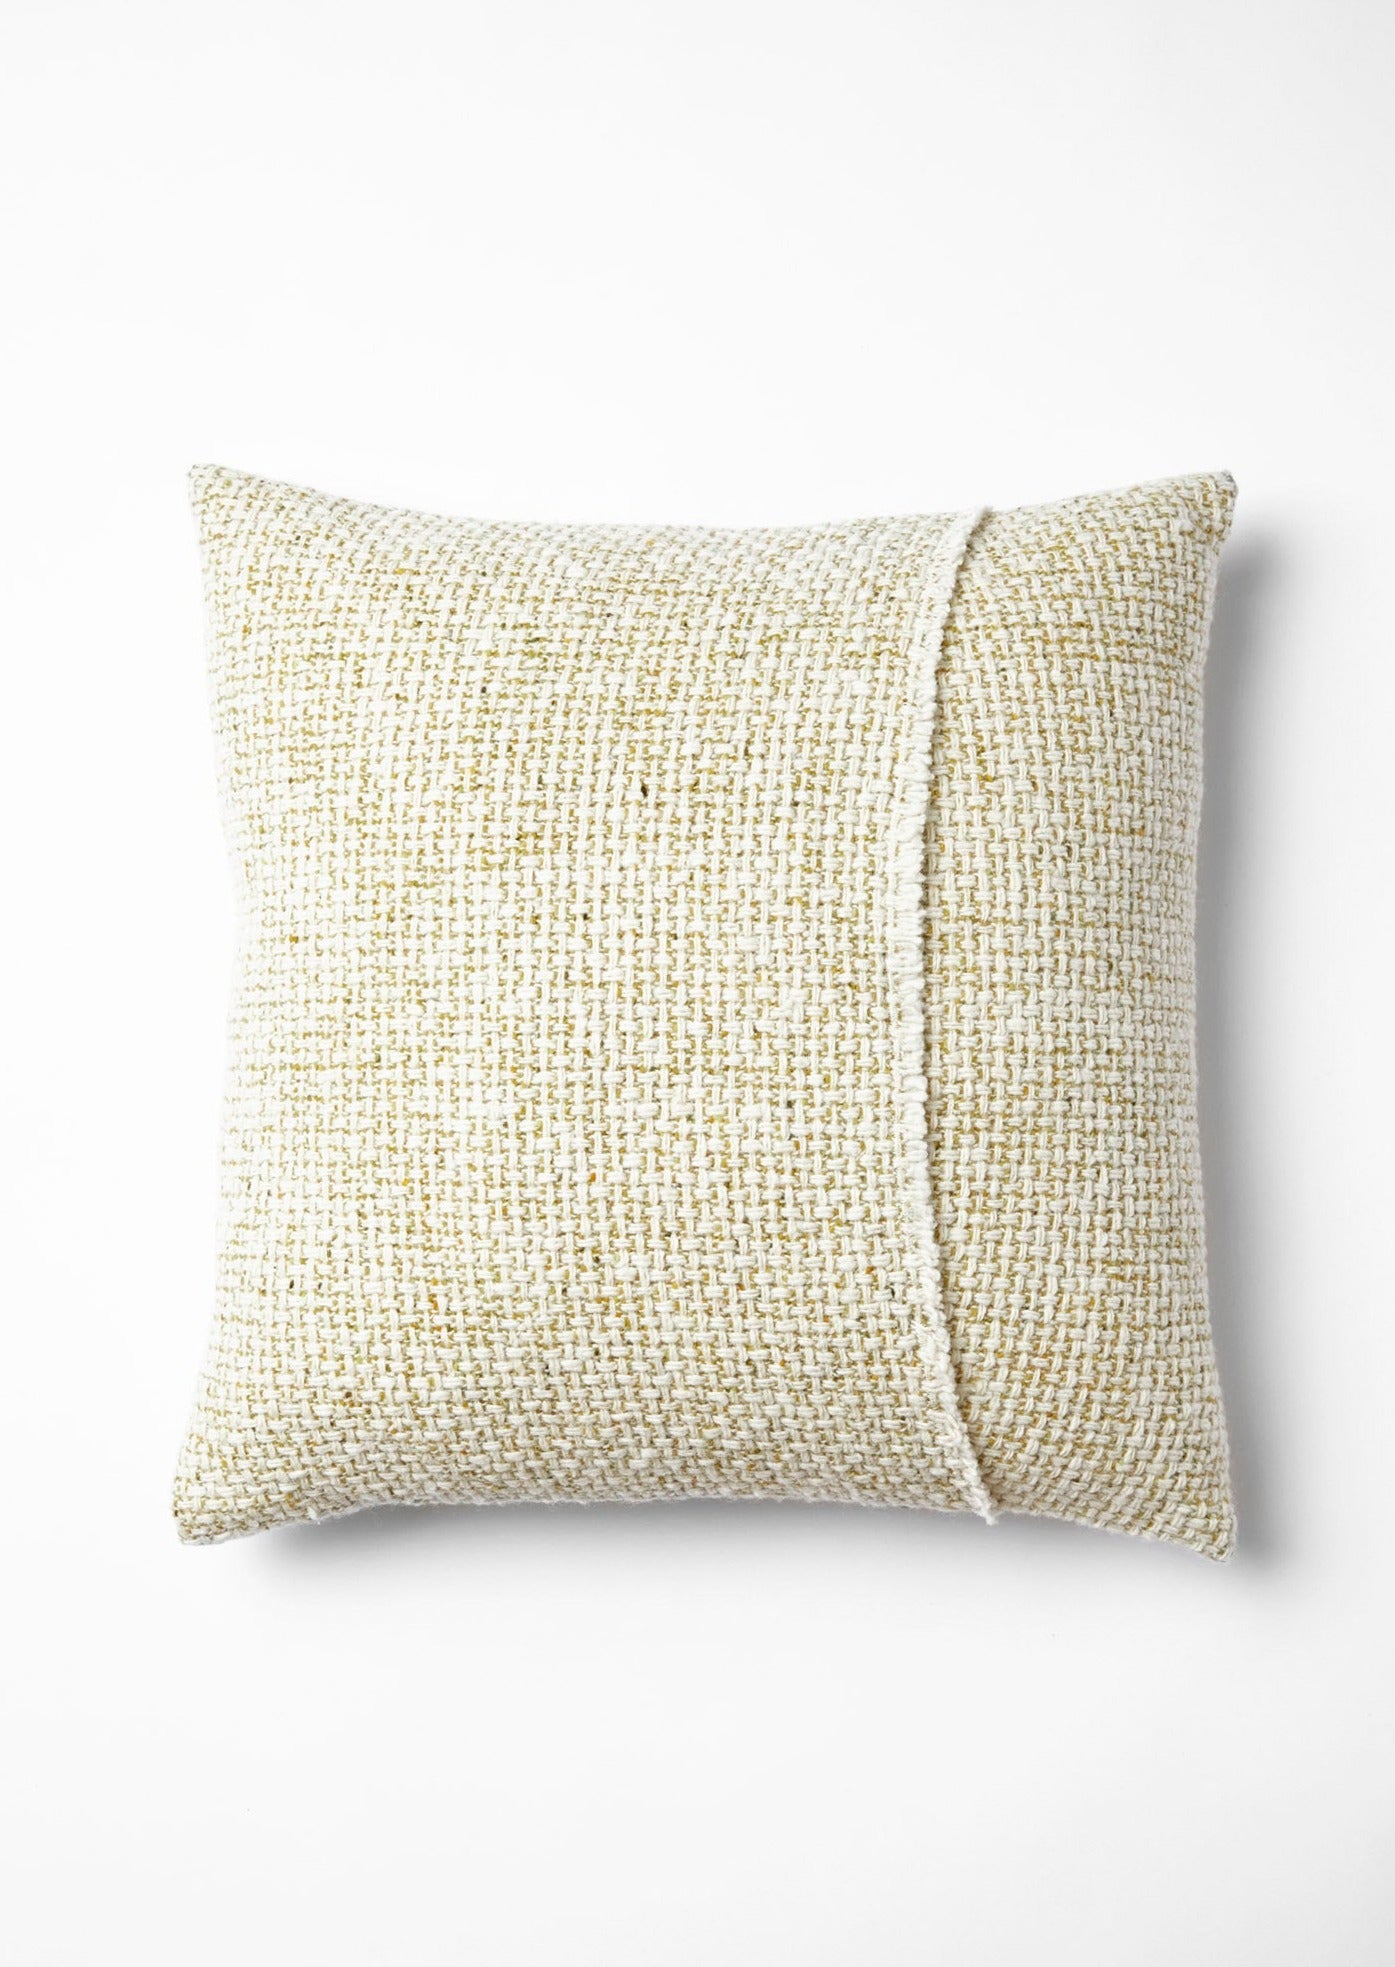 Mended Tweed Cushion - Gooseberry